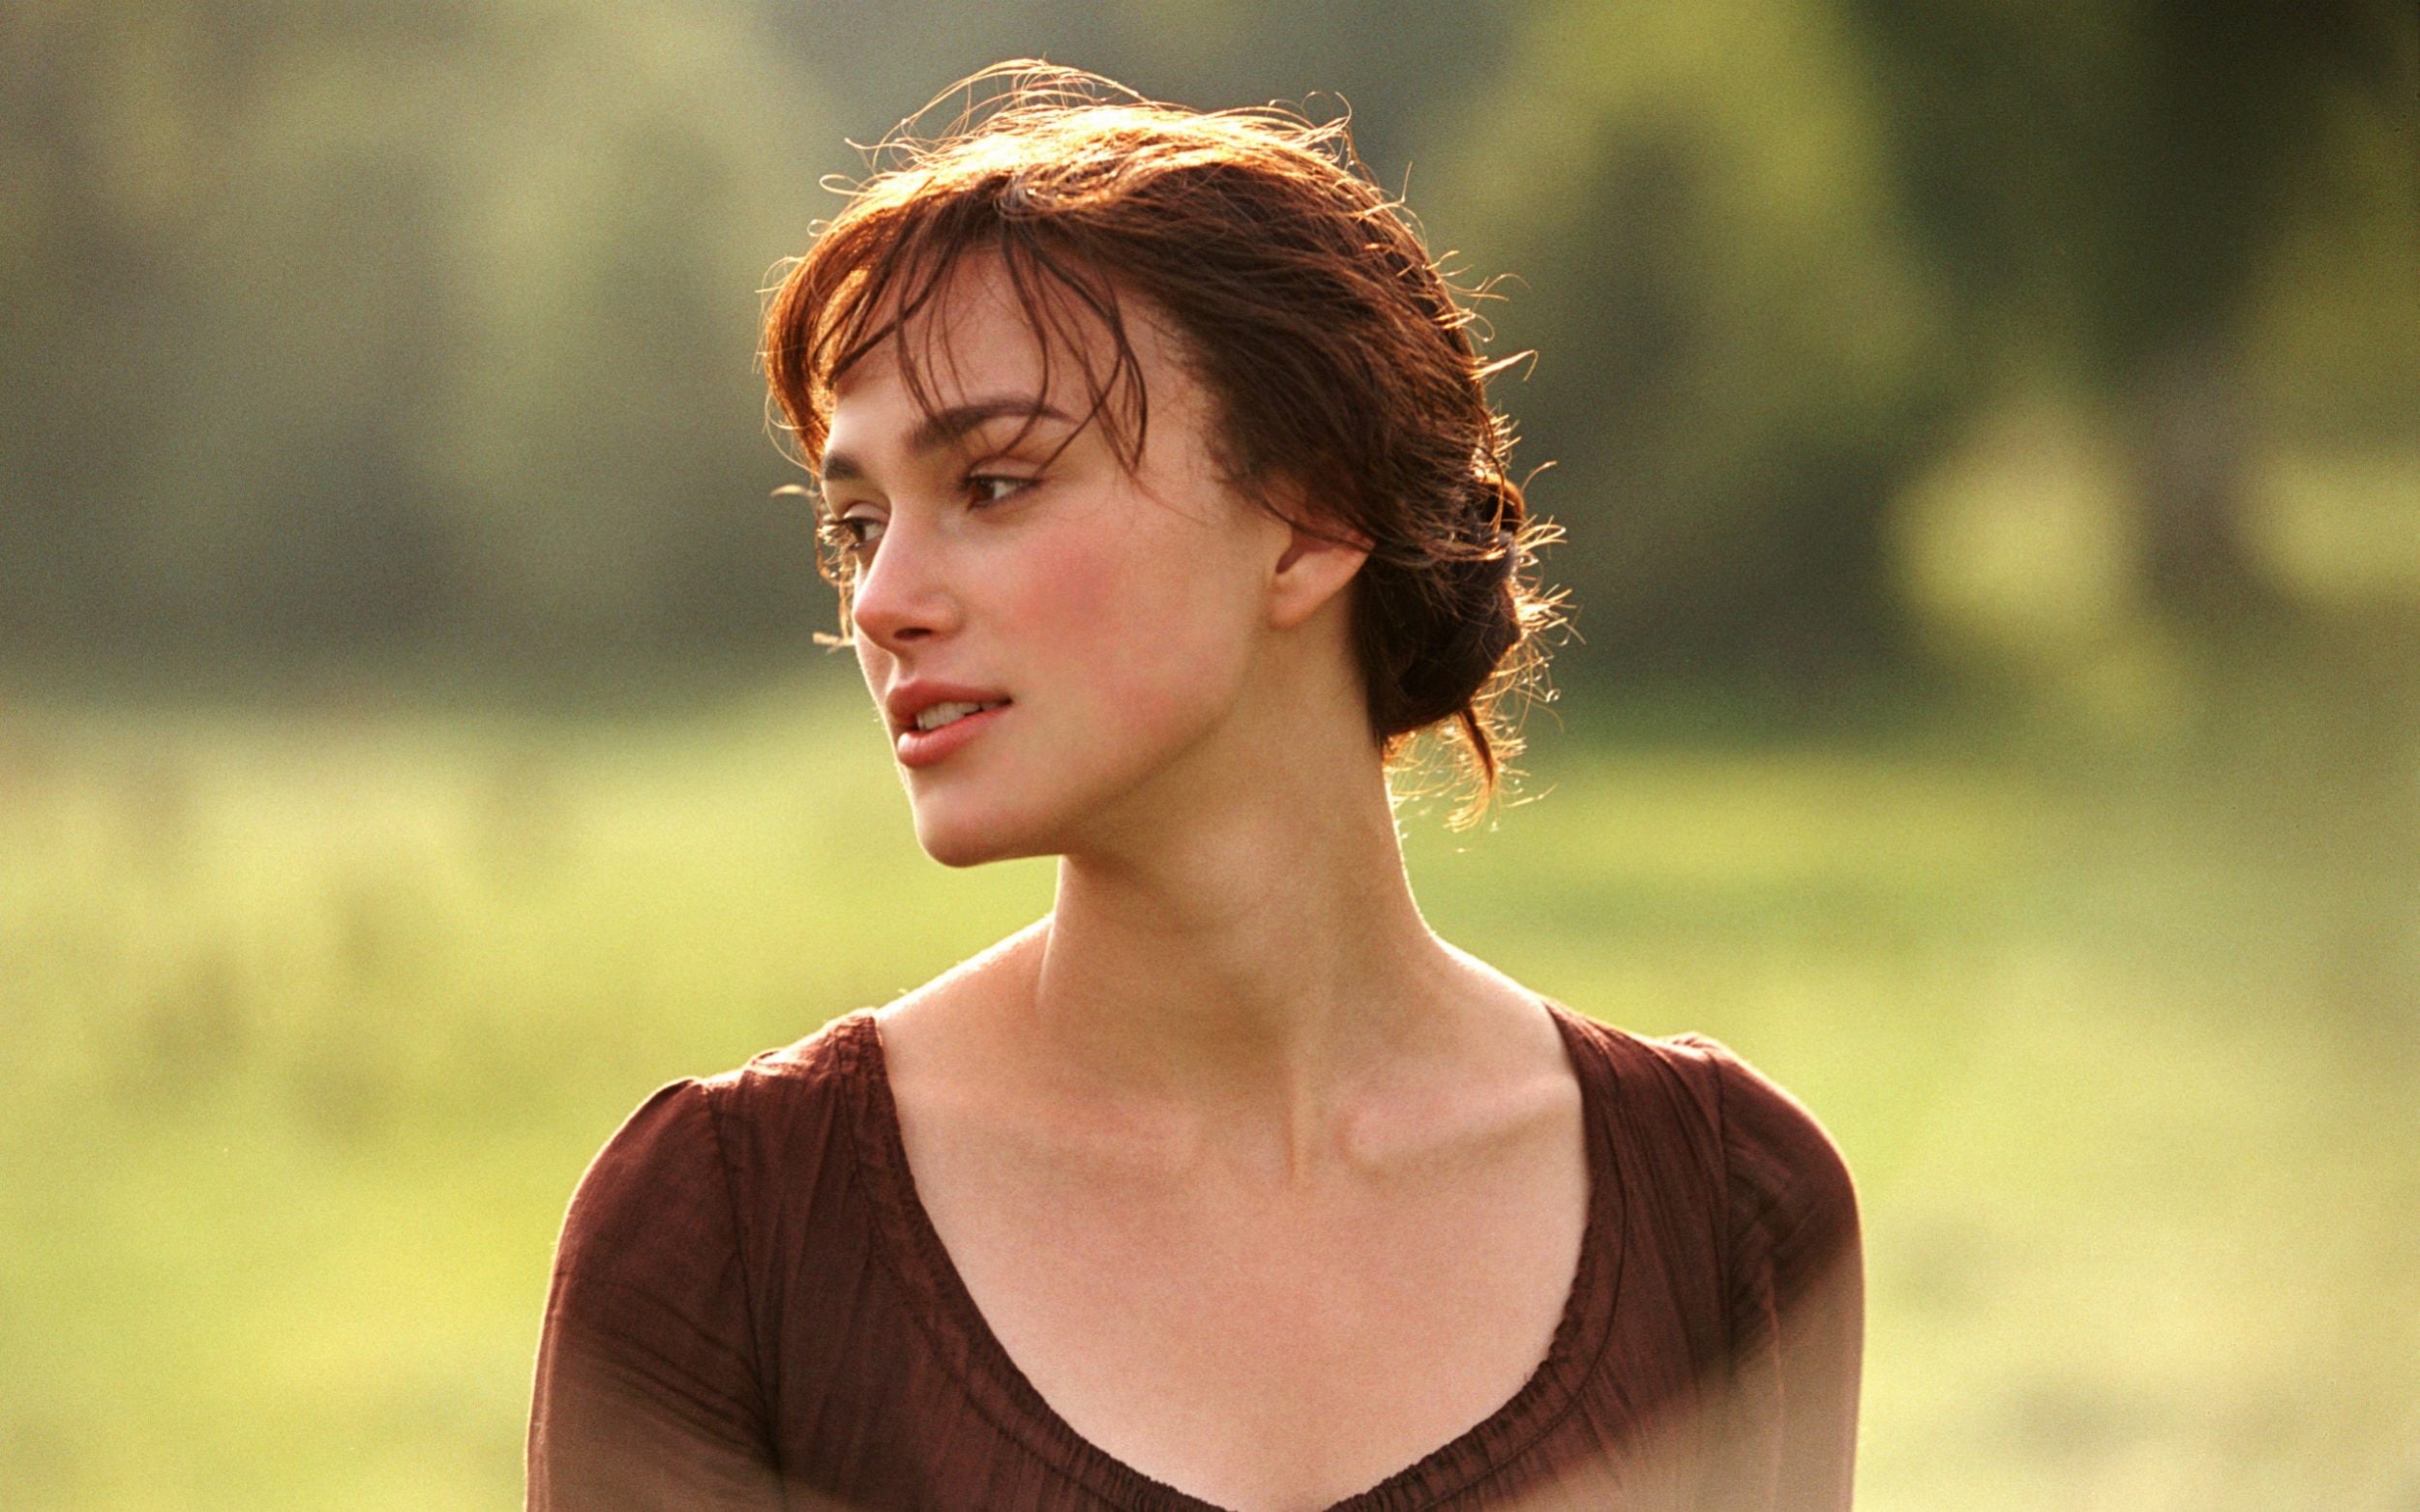 The British actress Keira Knightley in a film still from the 2005 film adaptation of Jane Austen's 1813 novel Pride and Prejudice